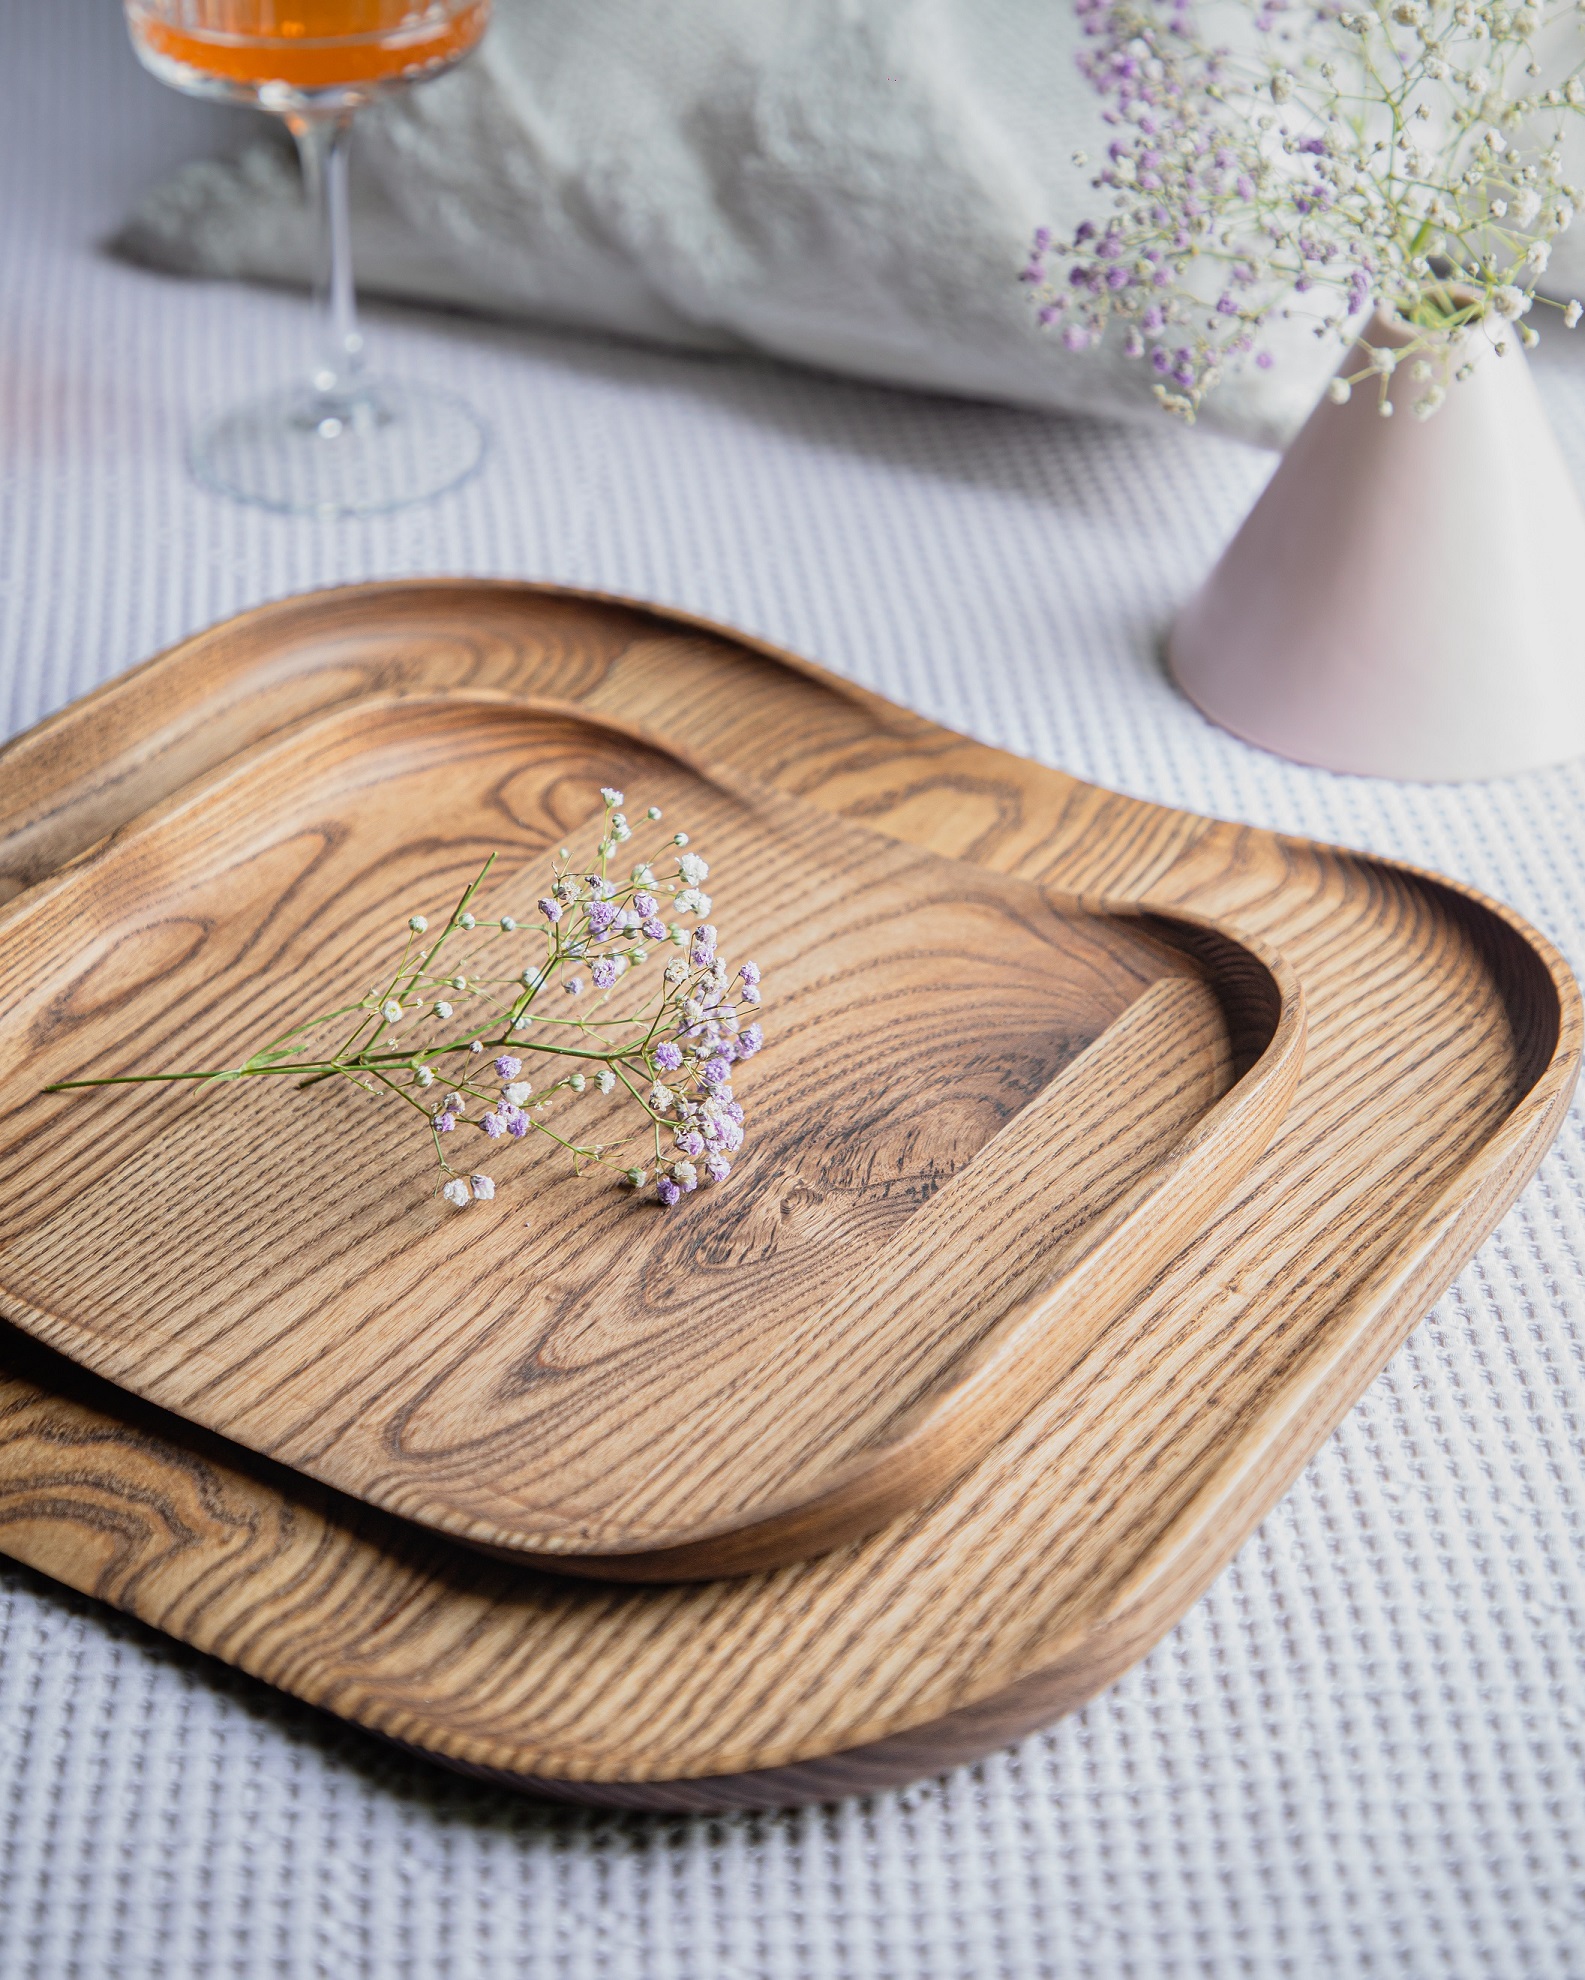 Biarc Wooden Tray